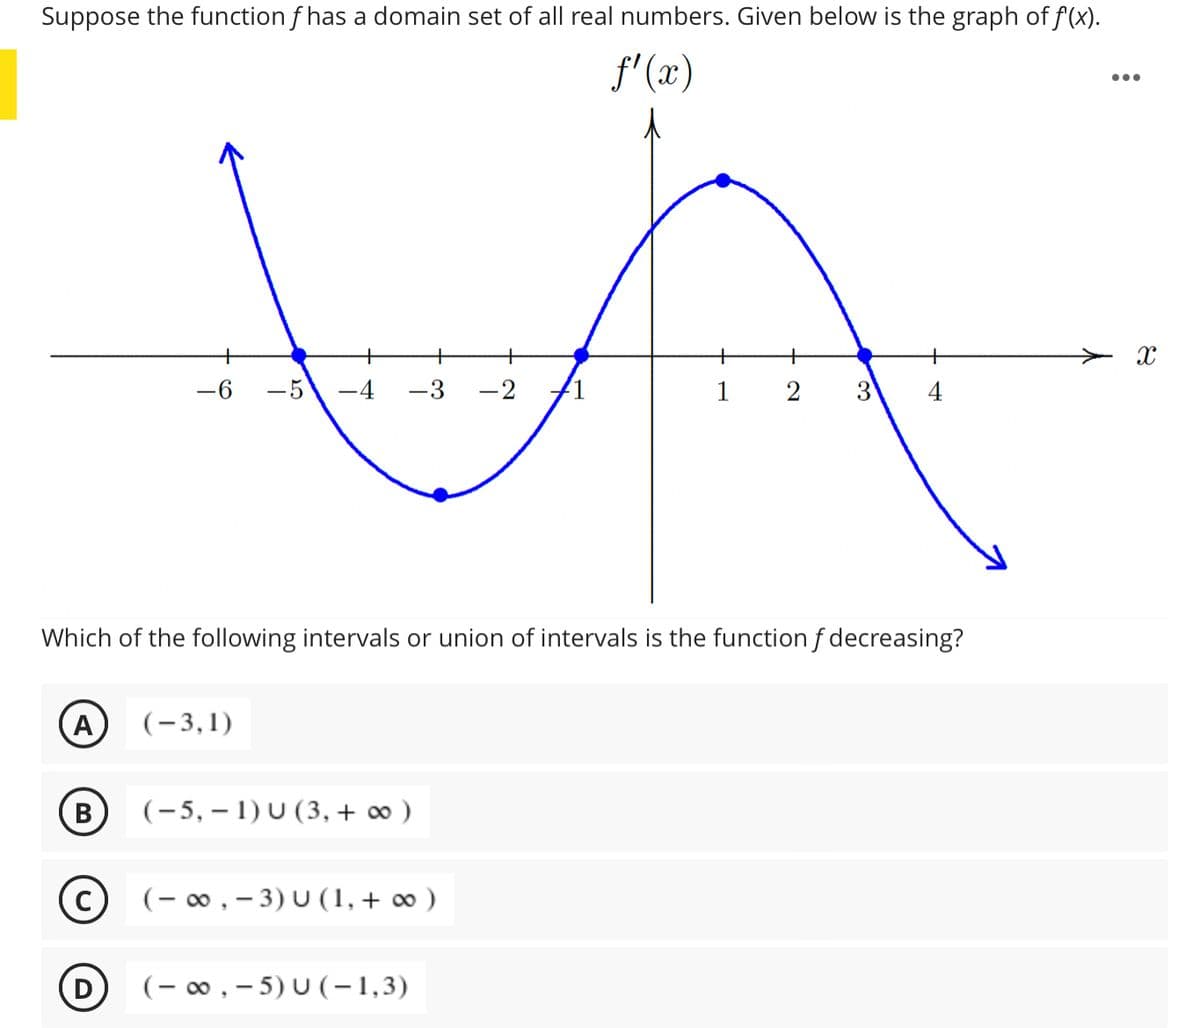 Suppose the function f has a domain set of all real numbers. Given below is the graph of f(x).
f'(x)
•..
+
+
-6
-5\ -4
-3
-2
1
3.
Which of the following intervals or union of intervals is the function f decreasing?
A
(-3,1)
(B
(-5, – 1) U (3, + ∞ )
(- 00 , – 3) U (1,+ ∞ )
(- 00, - 5) U (-1,3)
